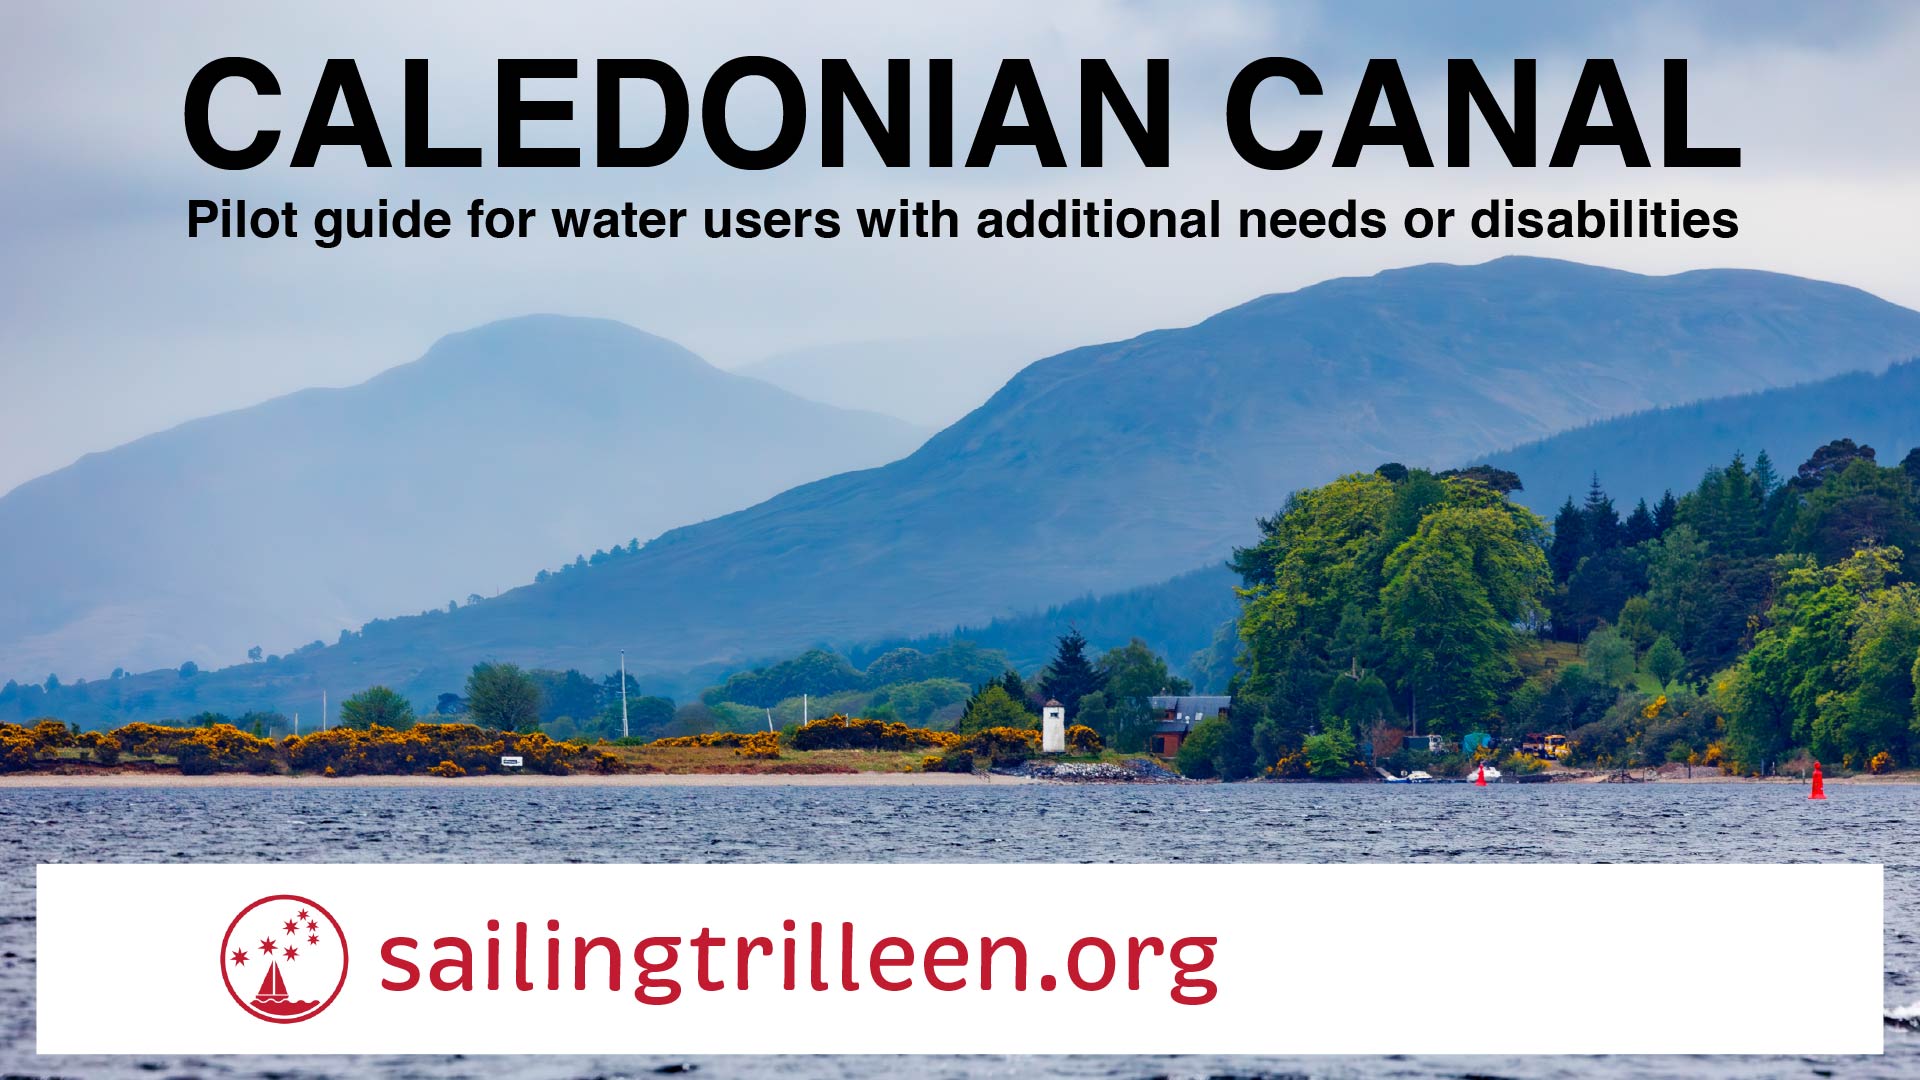 The disability pilot for the Caledonian Canal